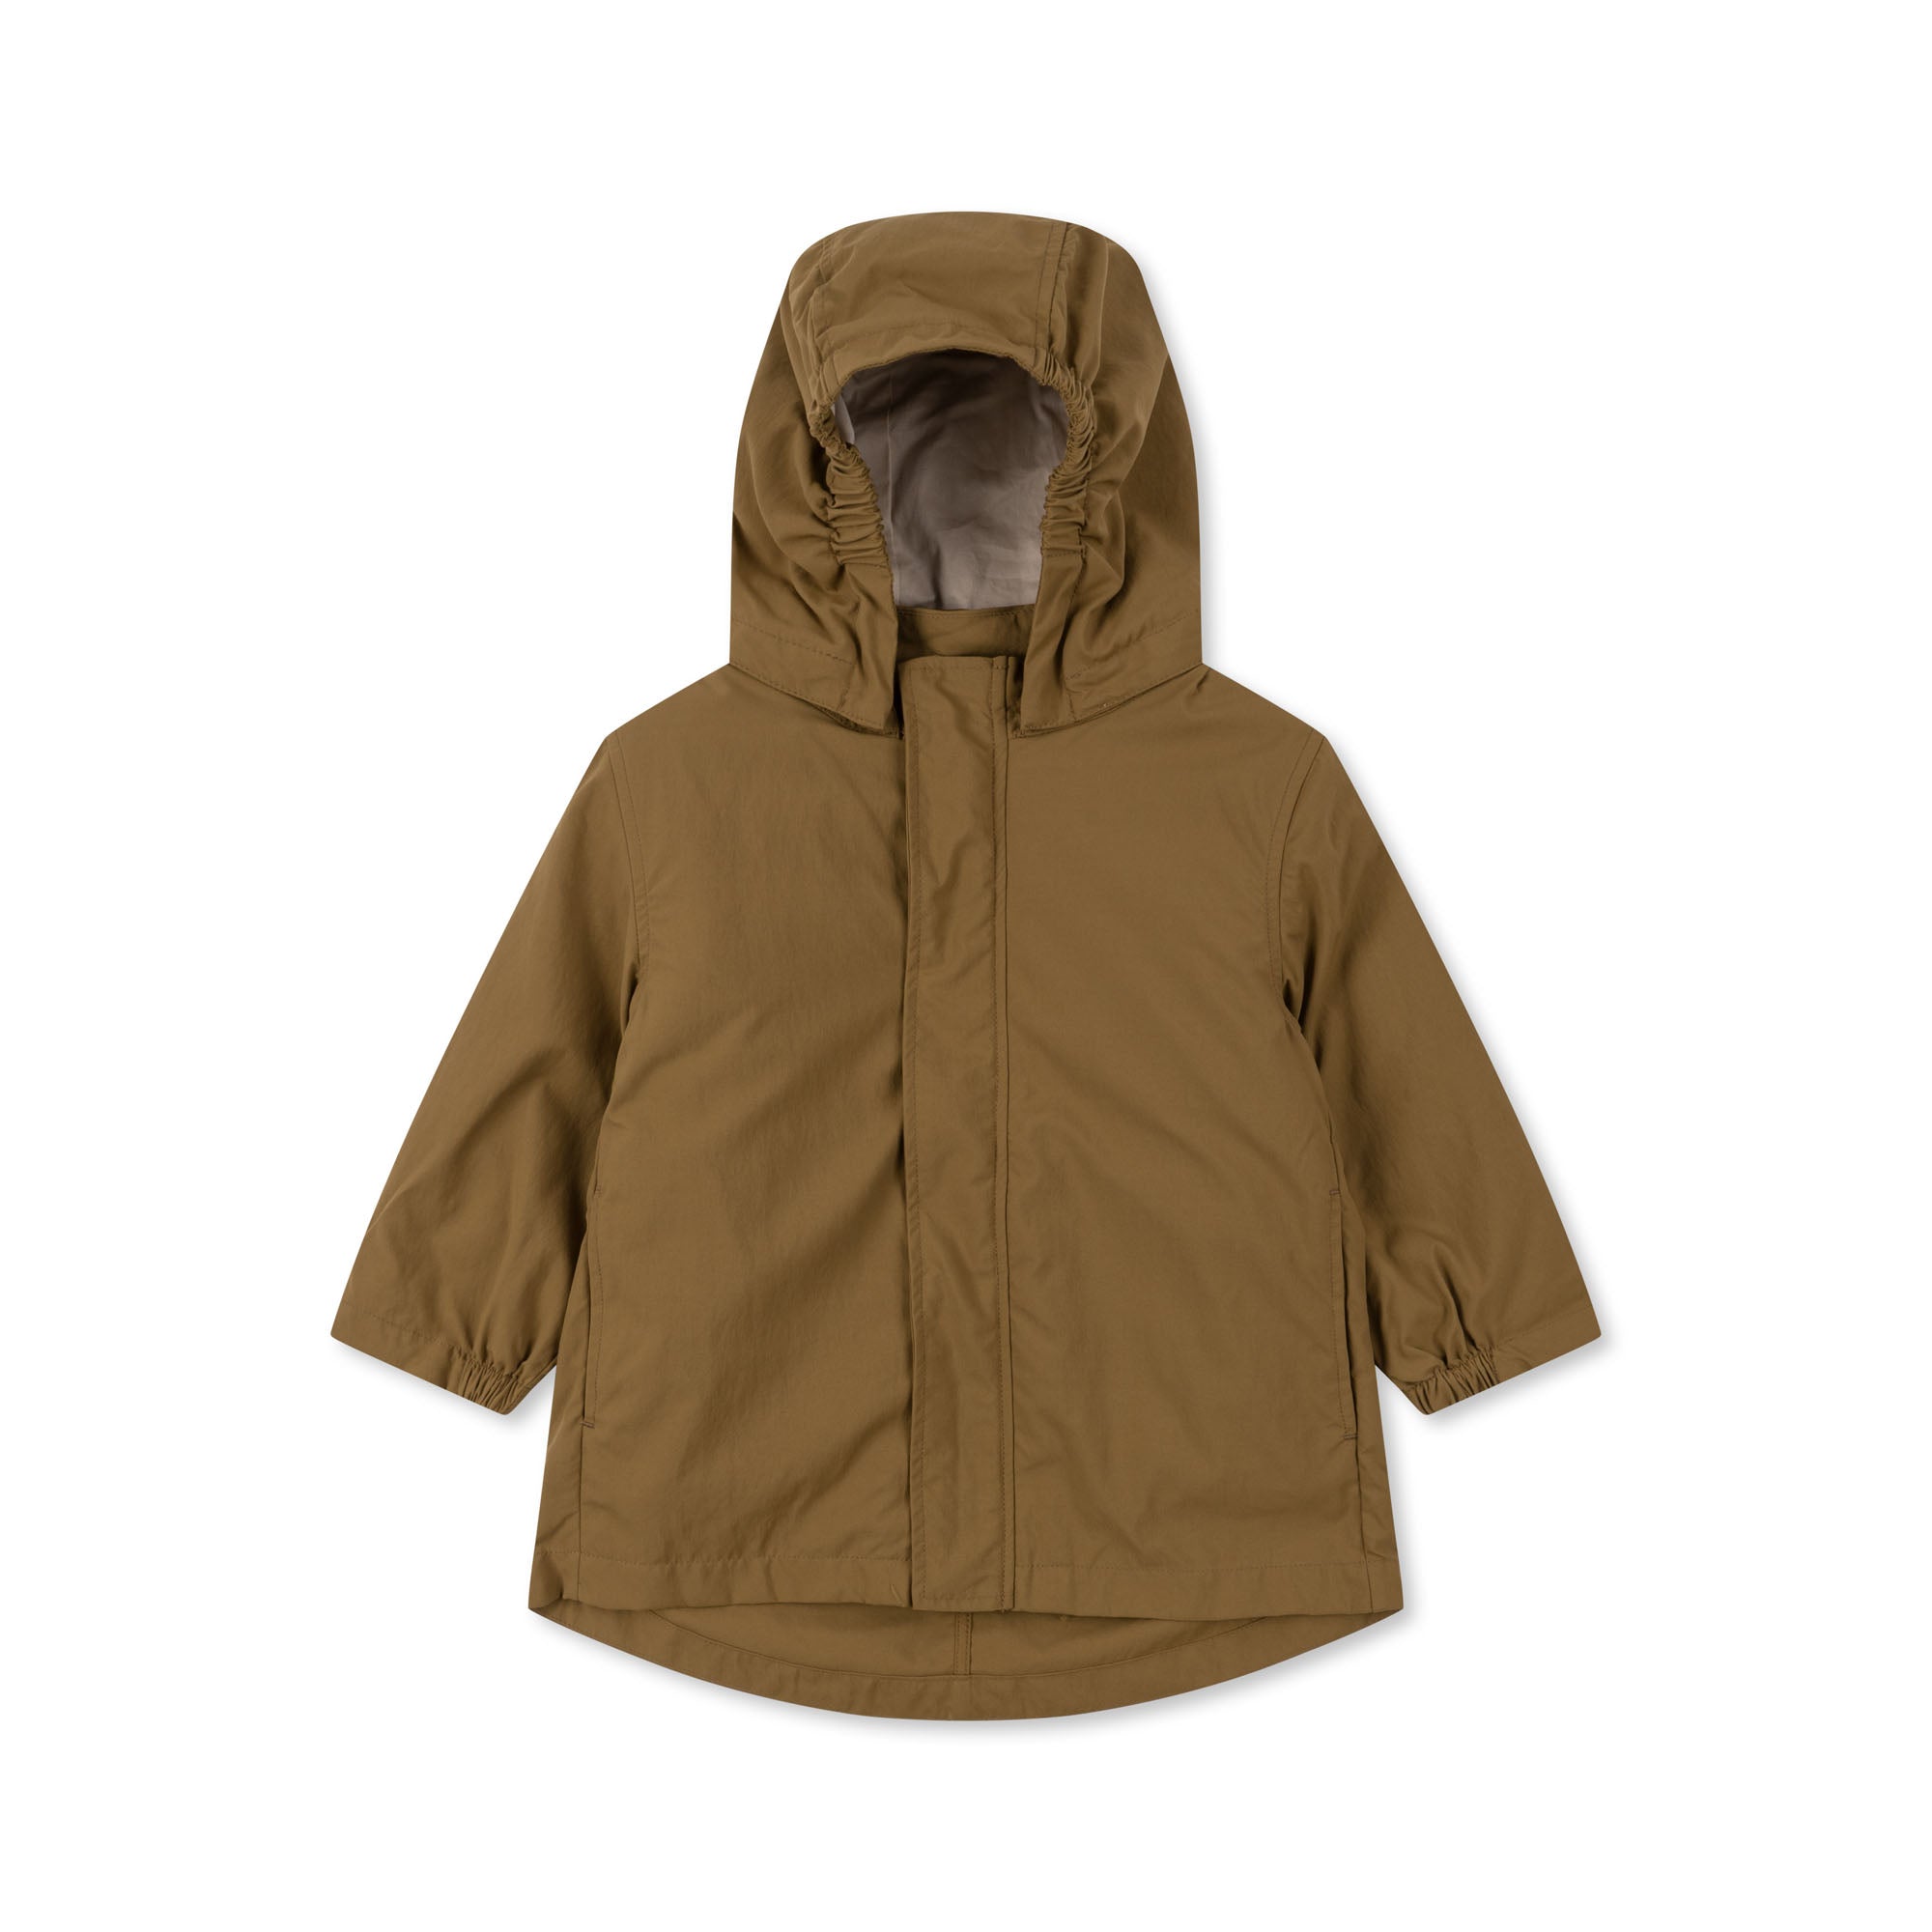 Anon 3-in-1 parka with a Konges Slojd thermal jacket